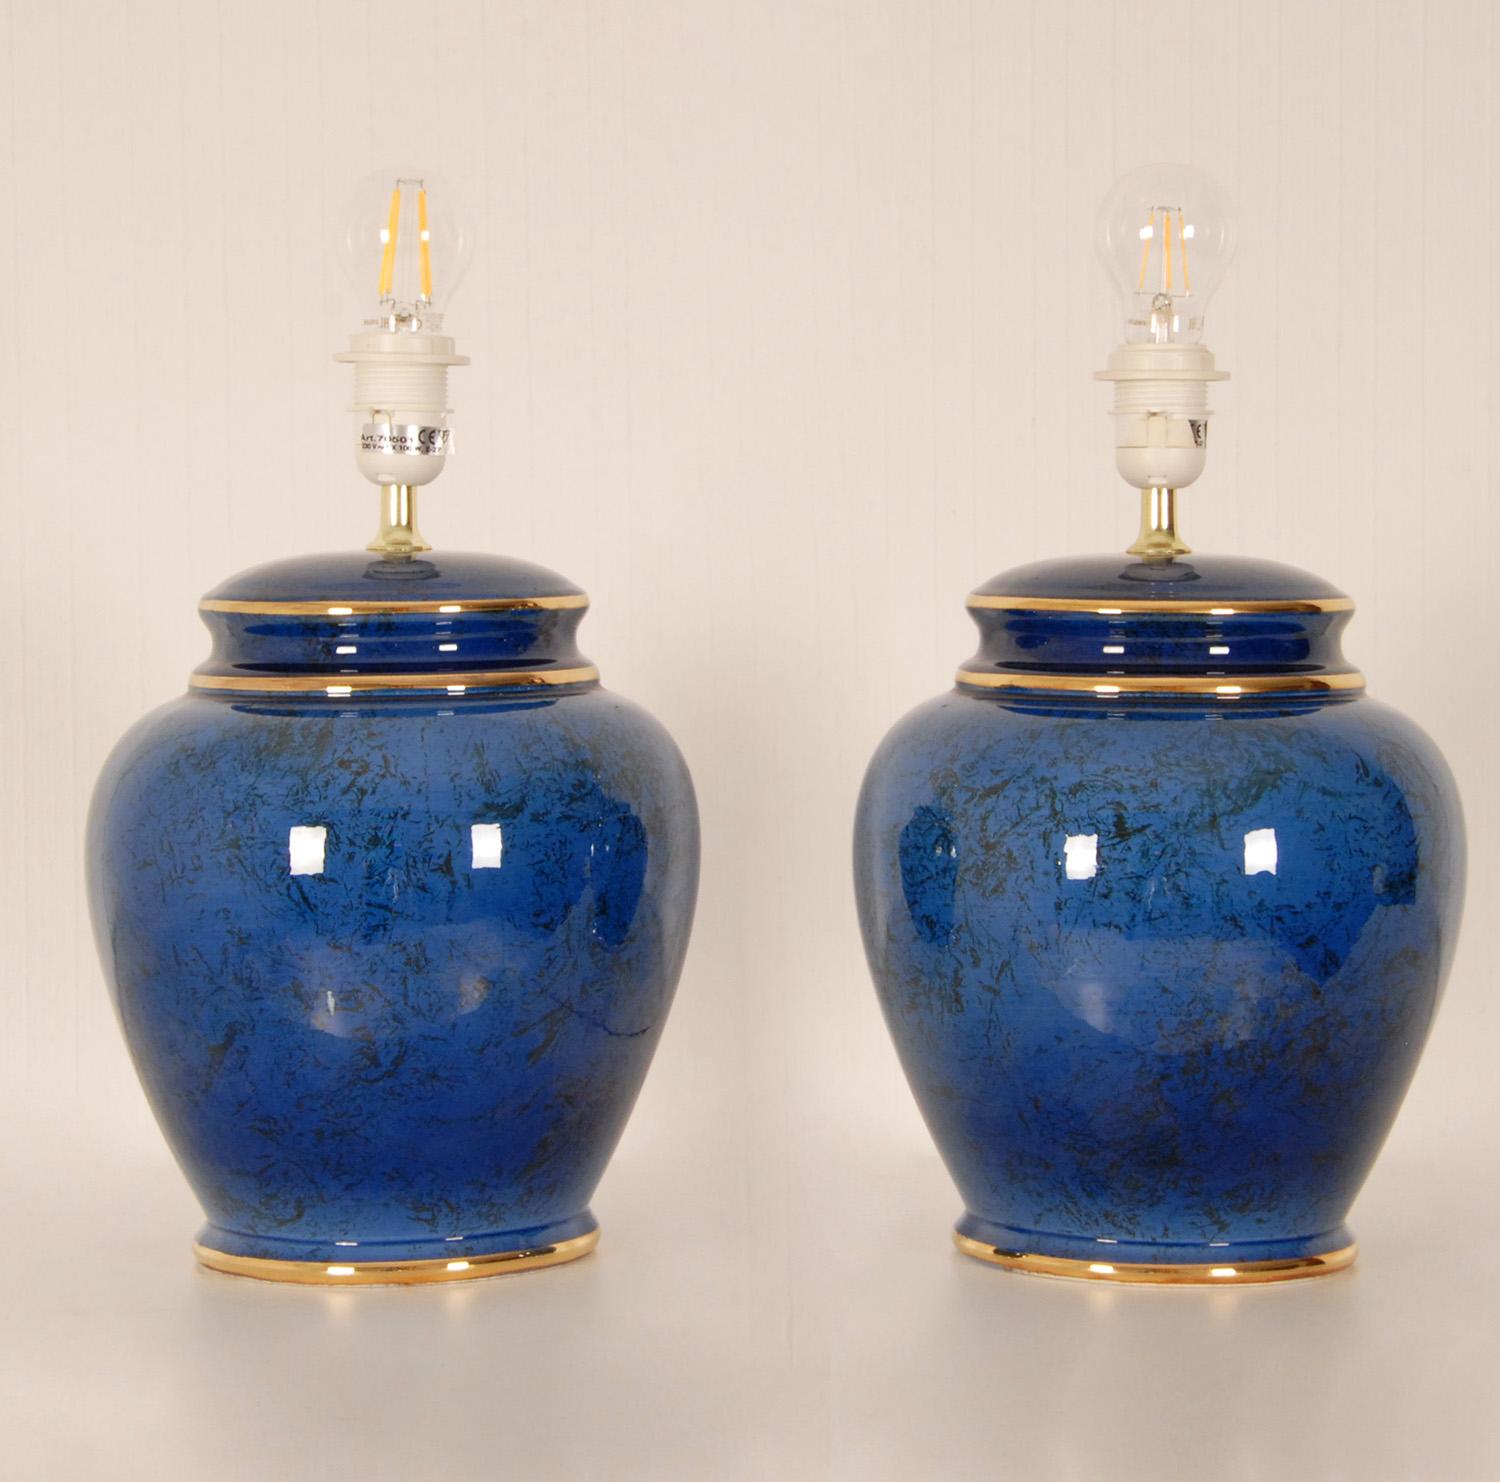 Vintage French Ceramic Lamps Blue Gold Chinoiserie Jars Vase Table Lamps a Pair 1